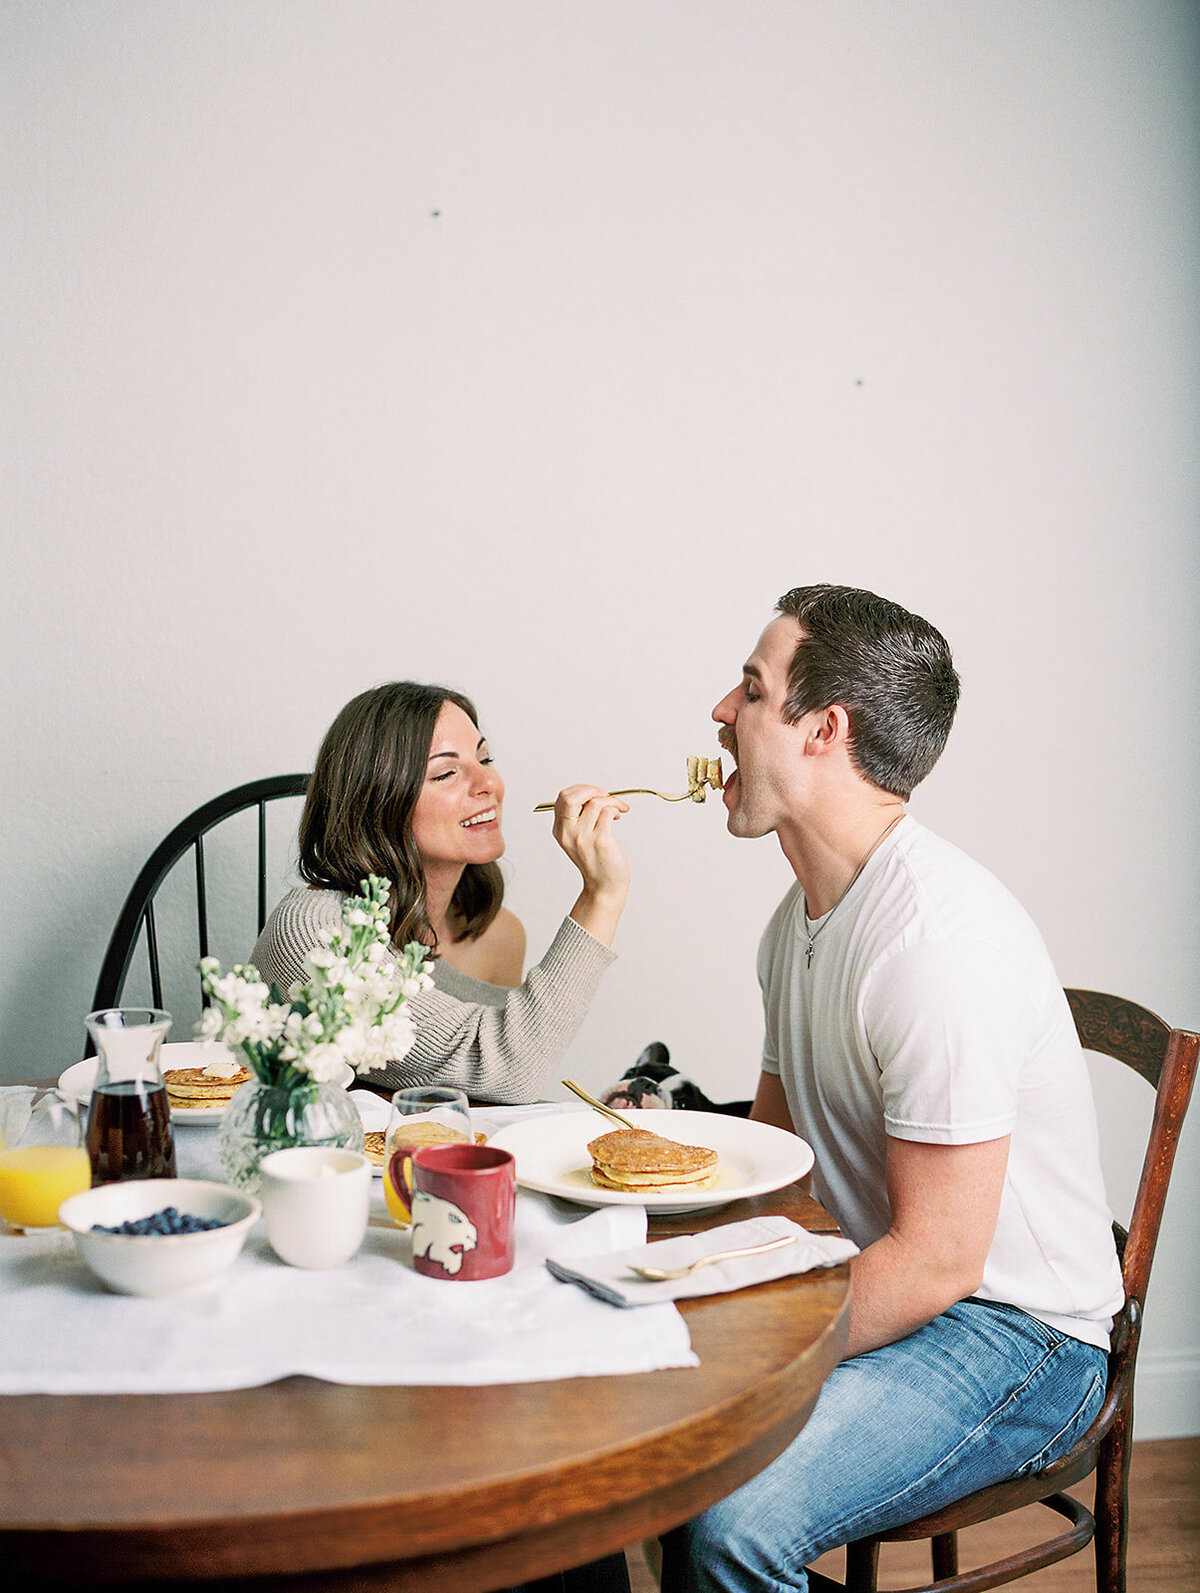 Woman feeding man a bite of food at a table with breakfast on it